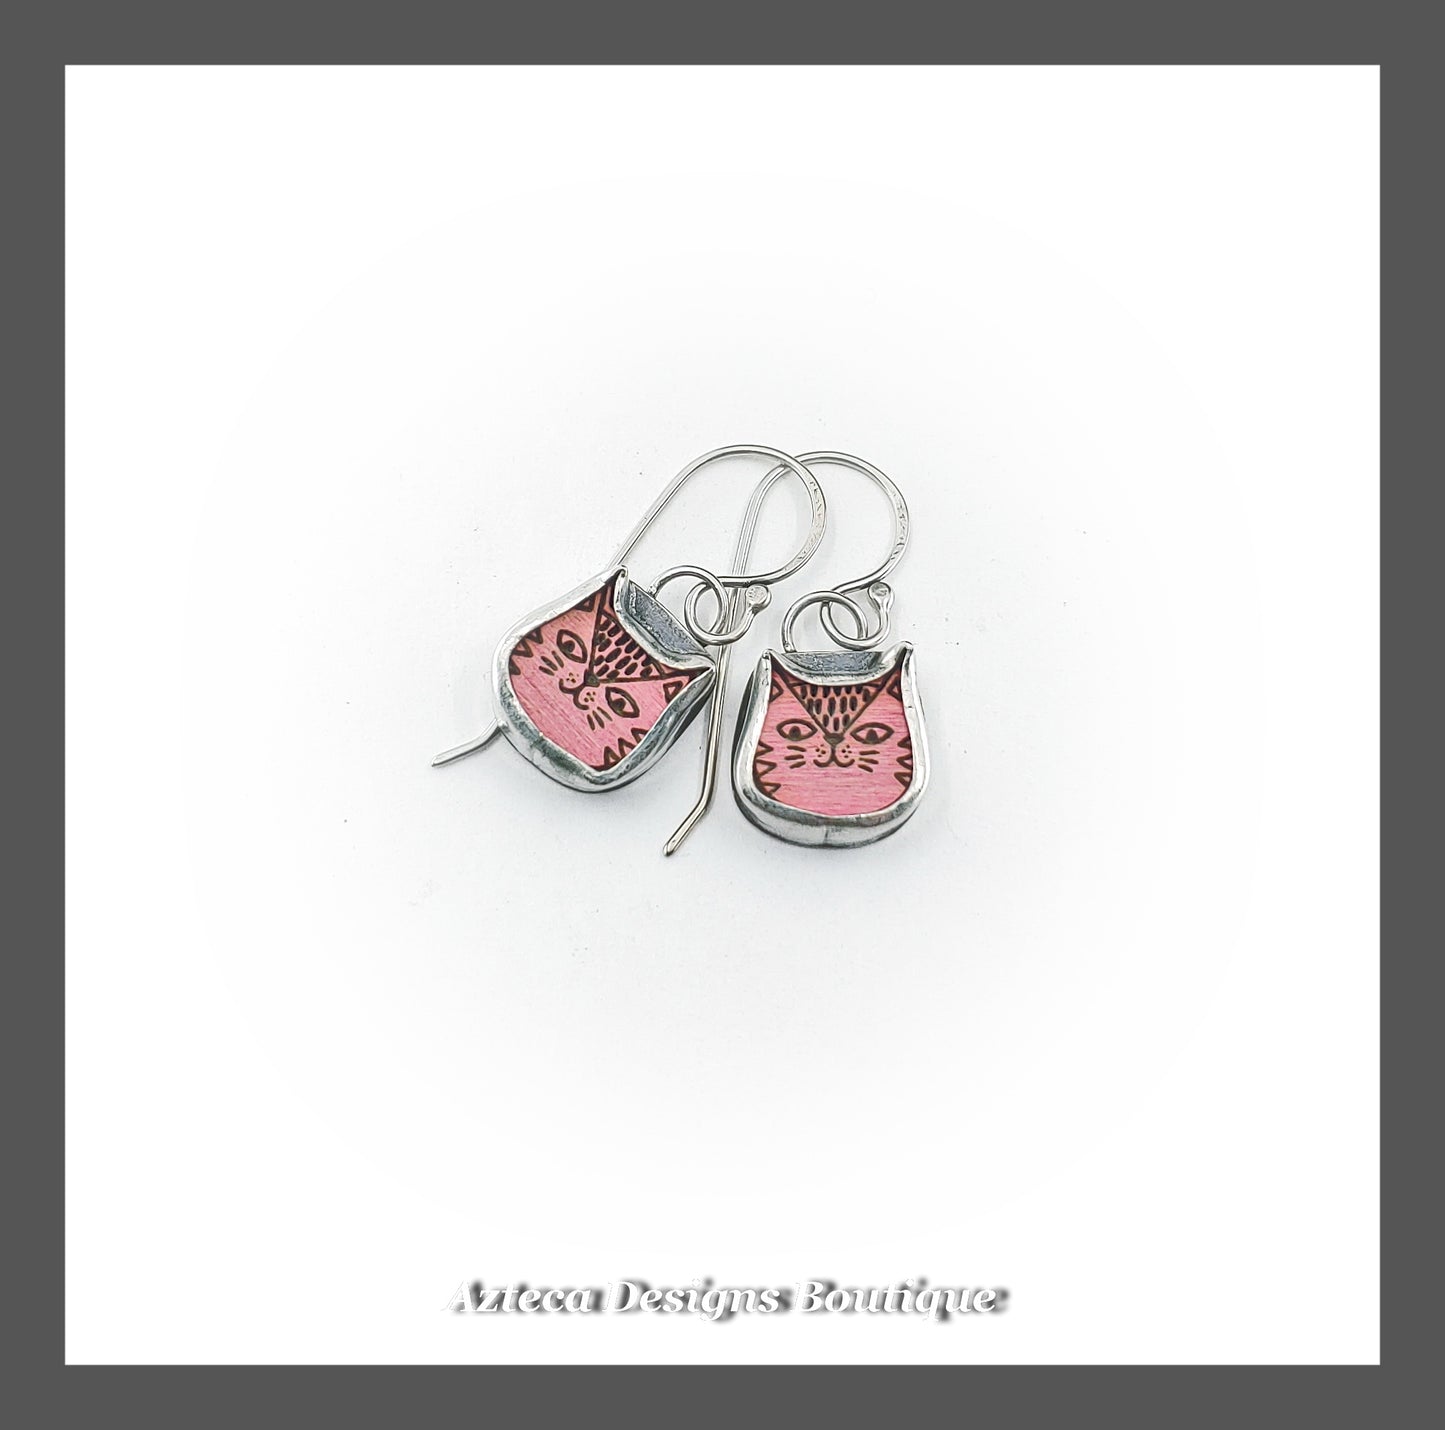 Pink Kitty + Hand Fabricated Argentium Silver Dangle Earrings